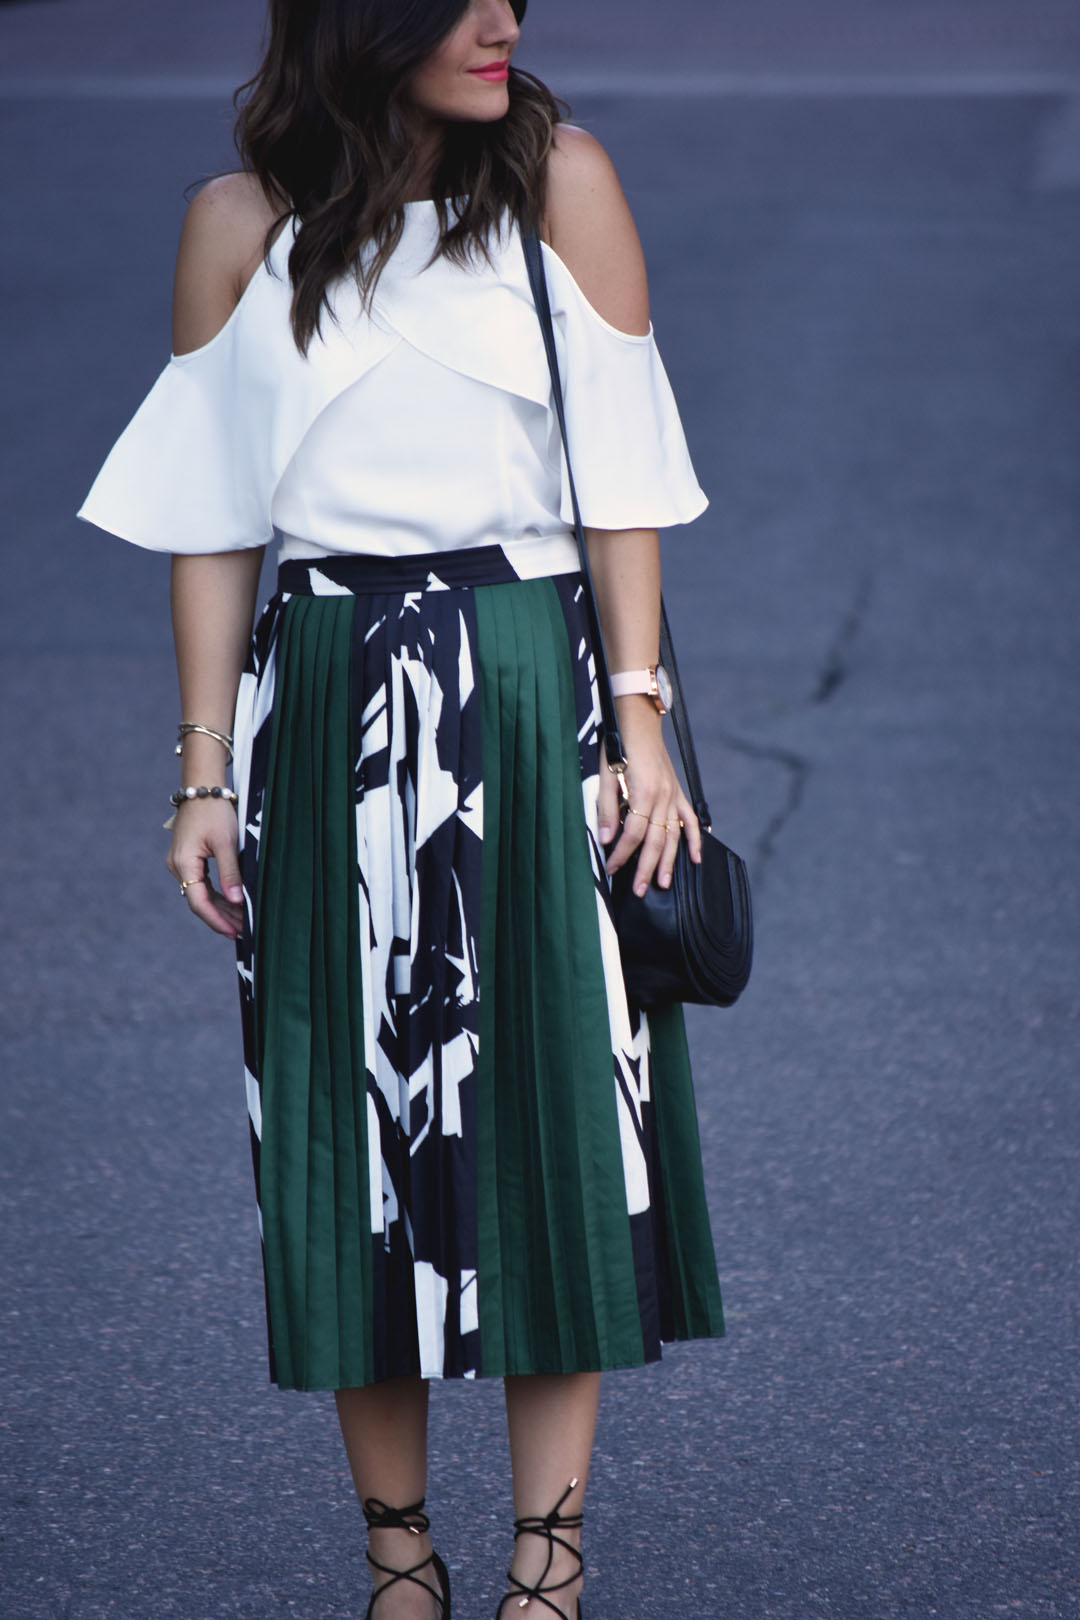 Chicwish pleated green skirt and cold shoulder white top - PLEATED MIDI SKIRT AND COLD SHOULDER TOP by popular Denver fashion blogger Chic Talk